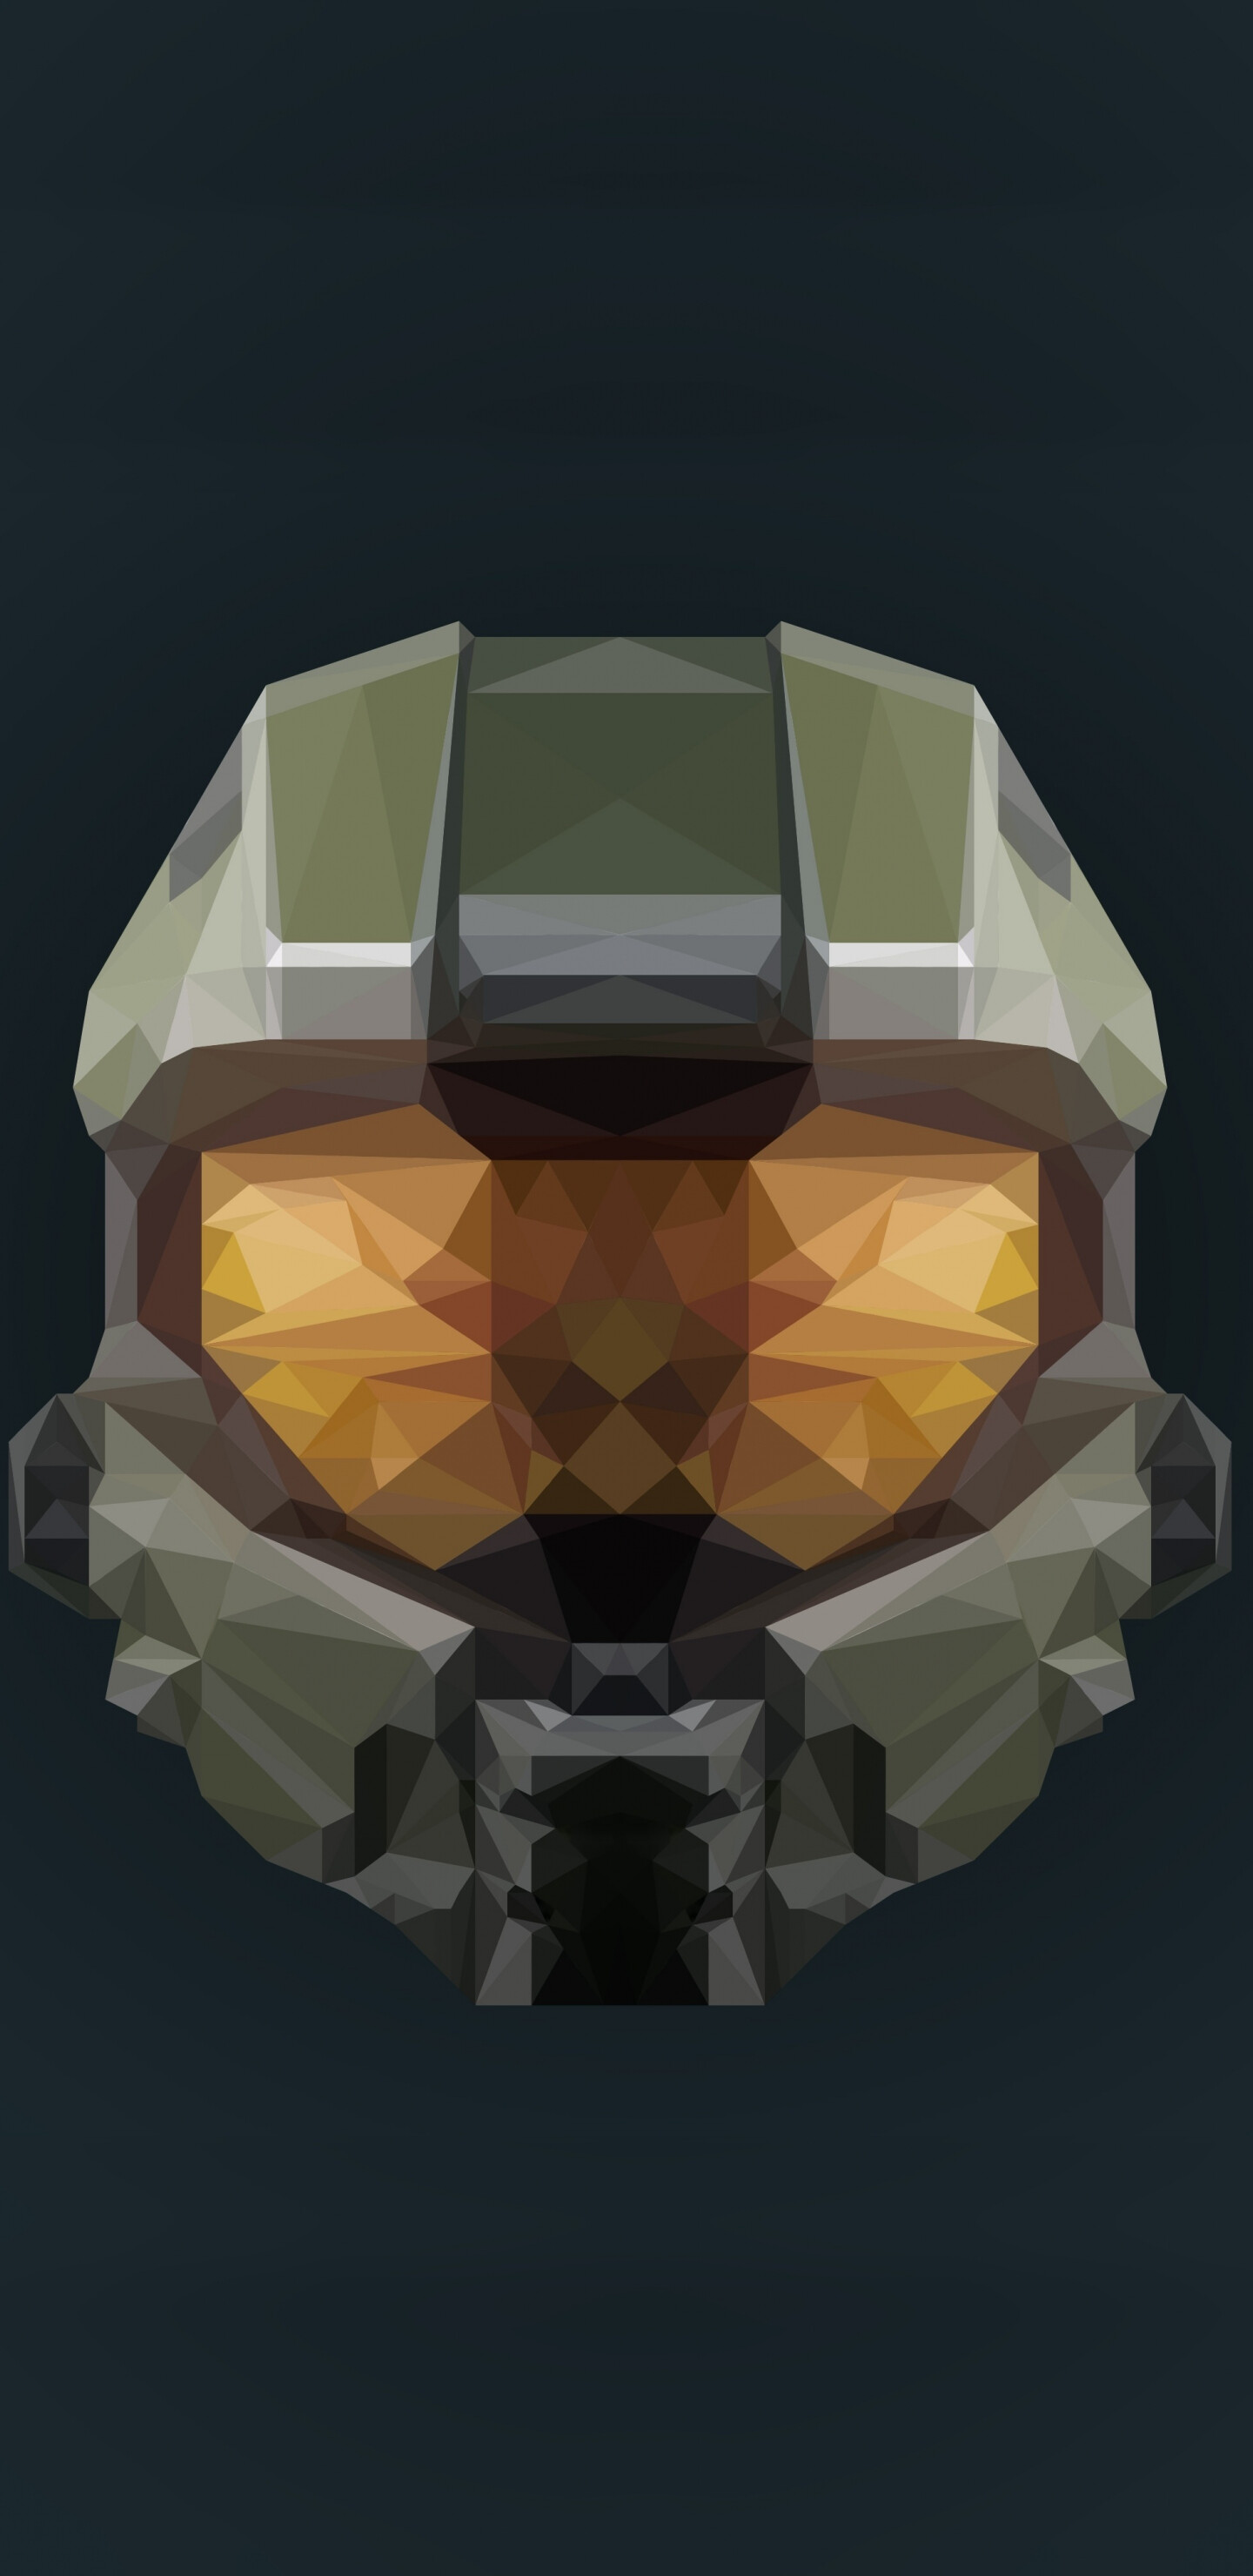 Halo: The Master Chief is a towering supersoldier known as a "Spartan", raised and trained from childhood for combat, Helmet, Artwork. 1440x2960 HD Background.